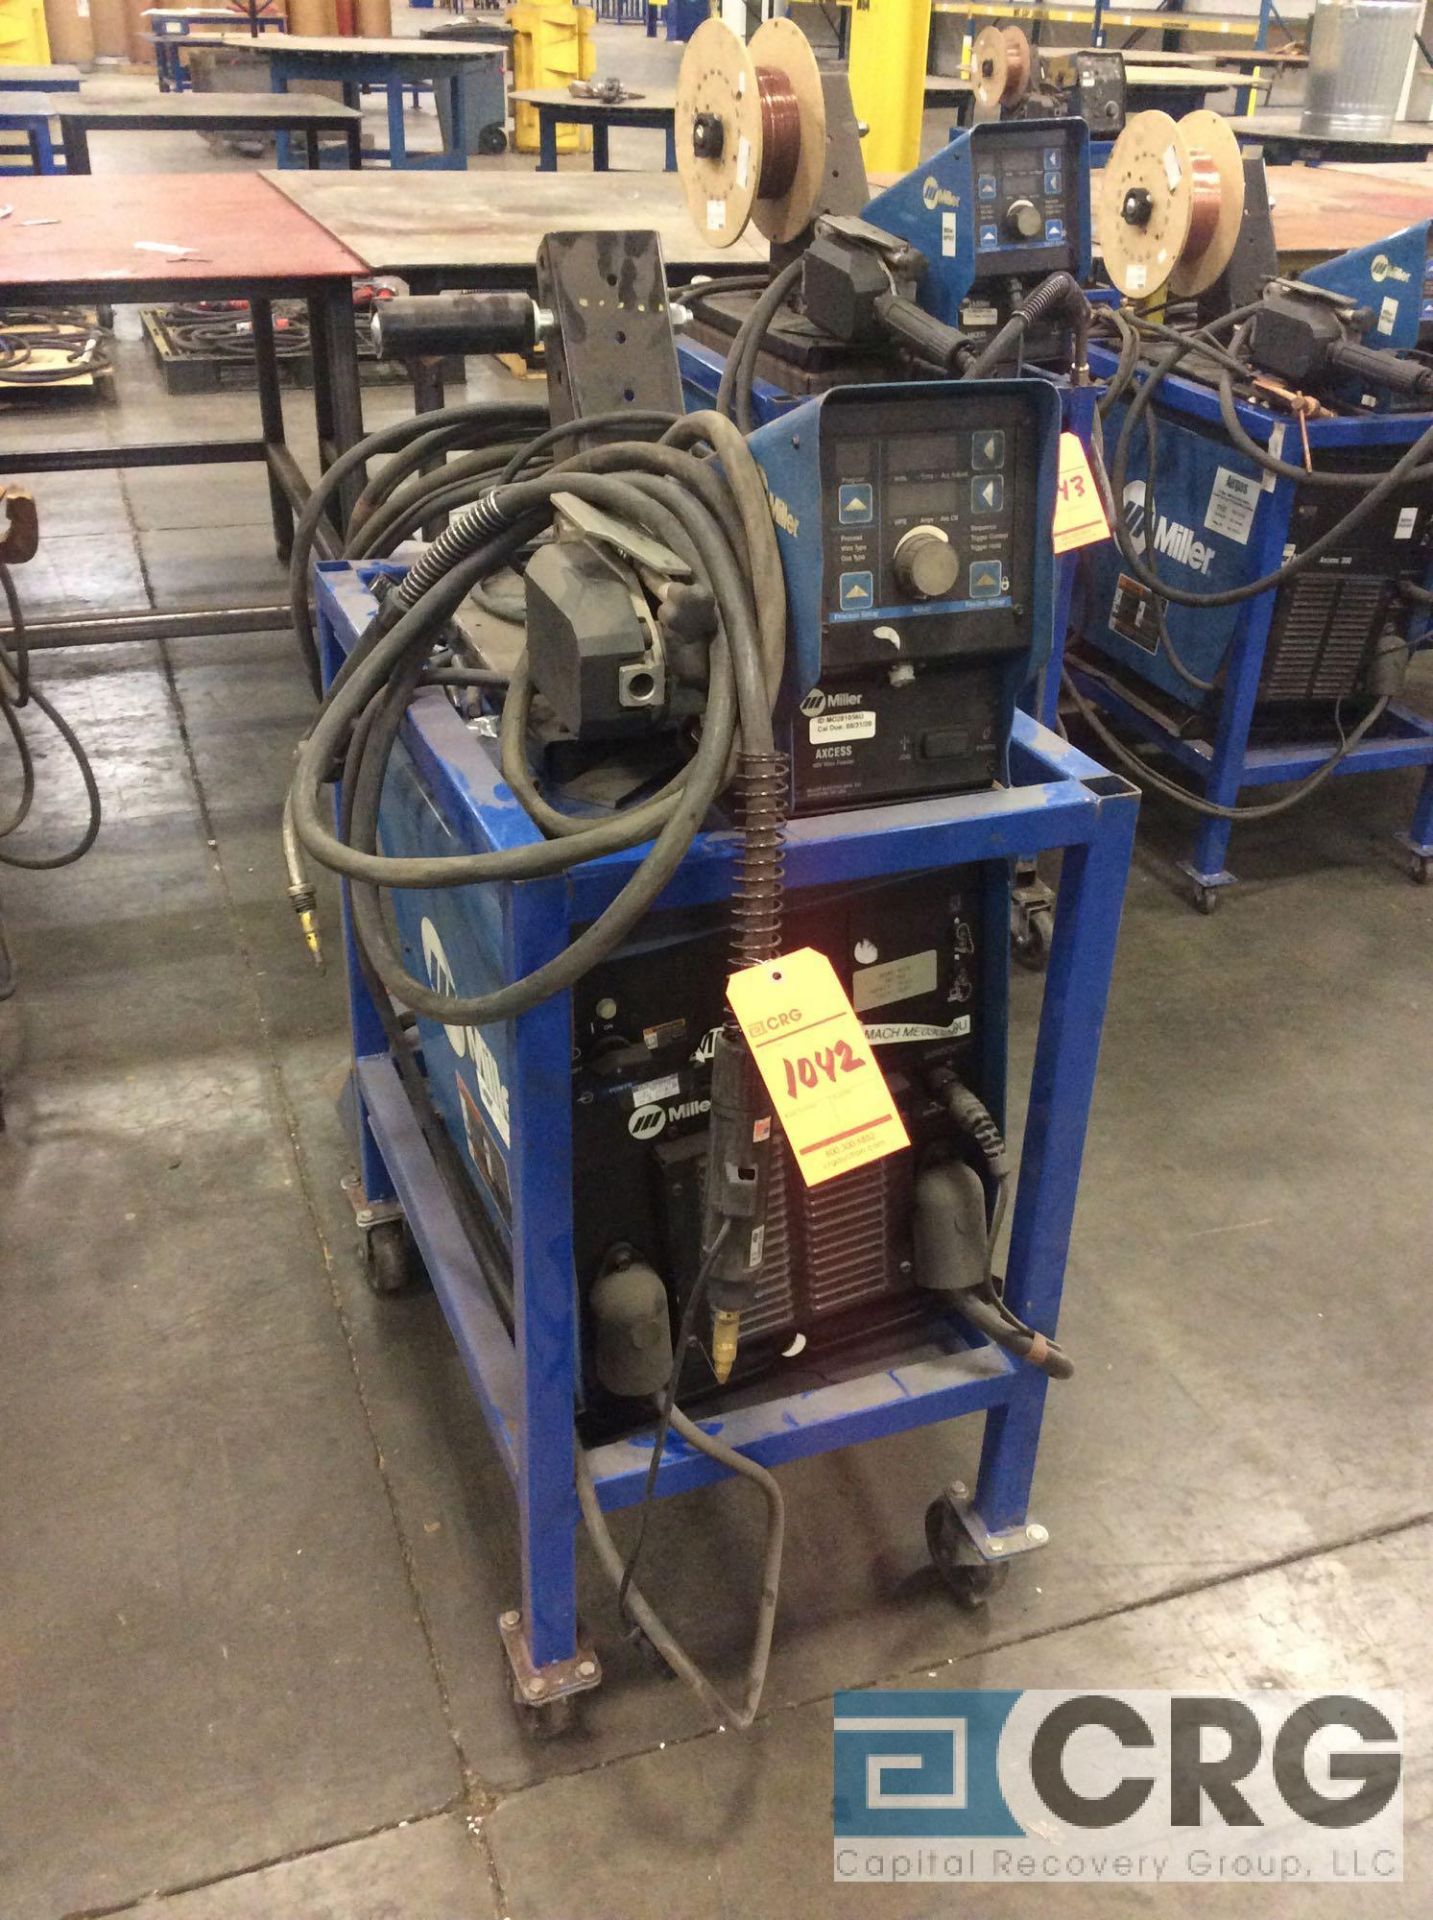 Miller AXCESS 300 welder, 3 phase With wire feed